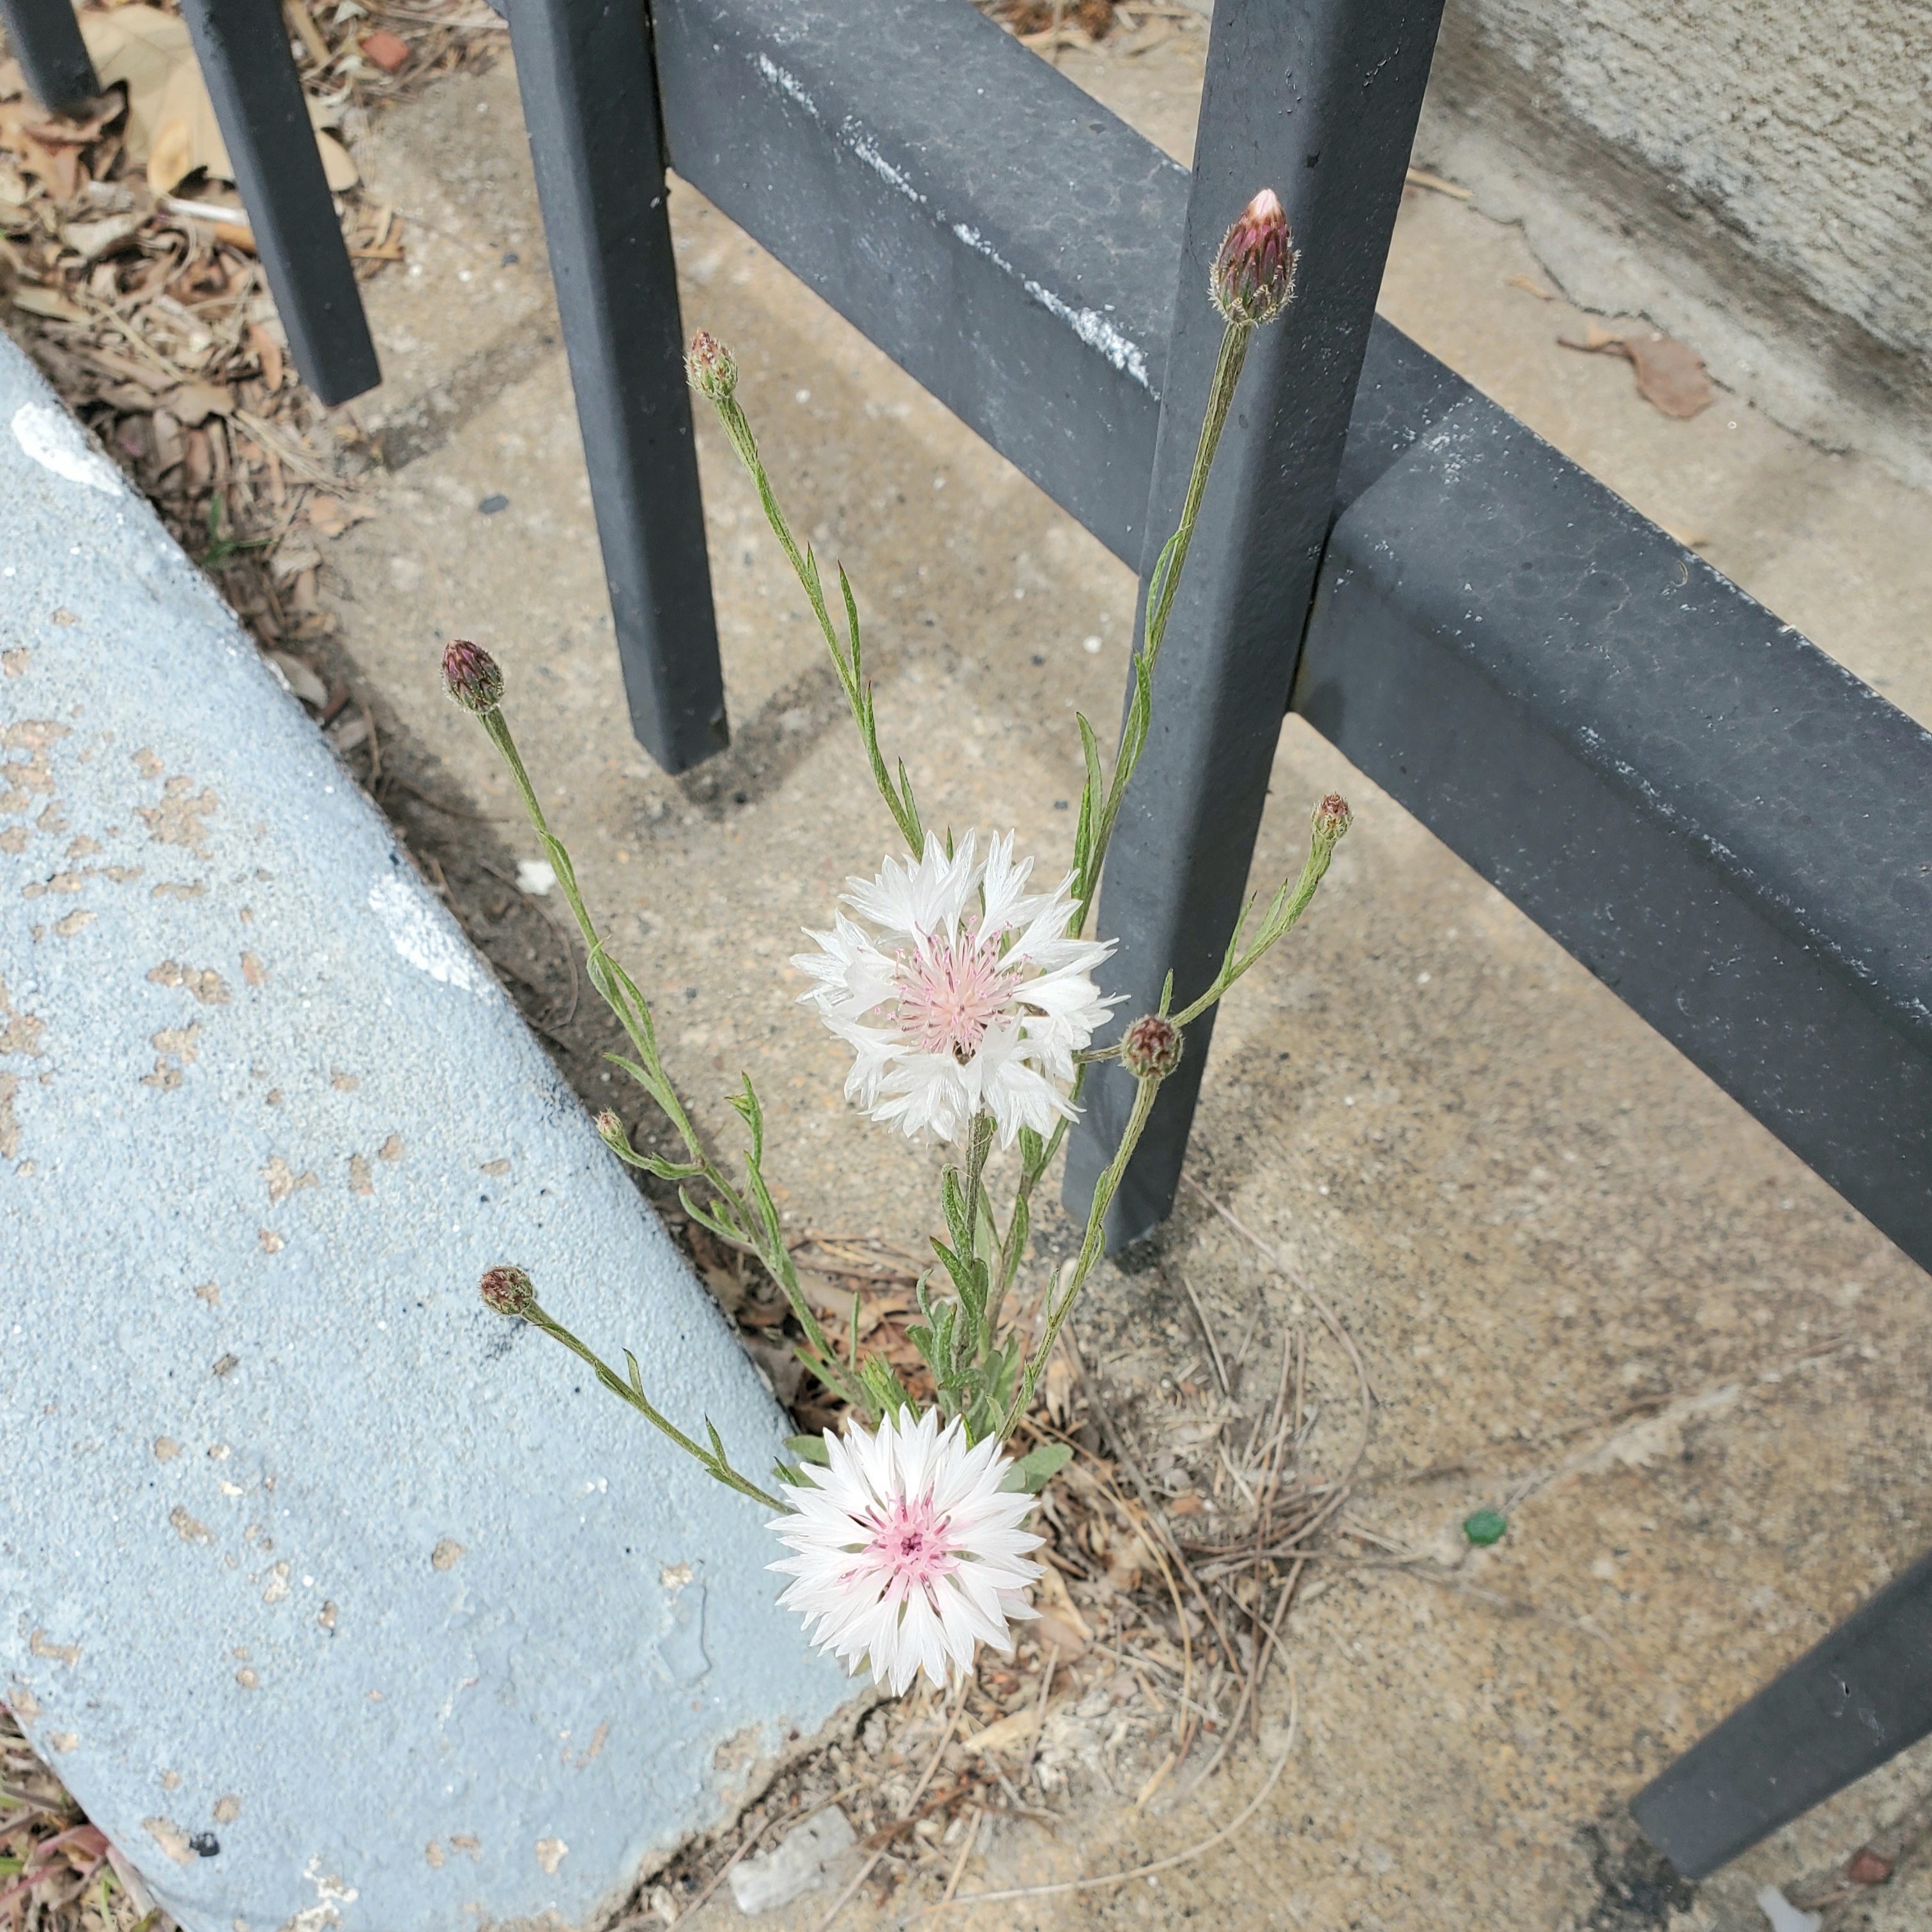 A little flower growing through the cracks in the sidewalk.